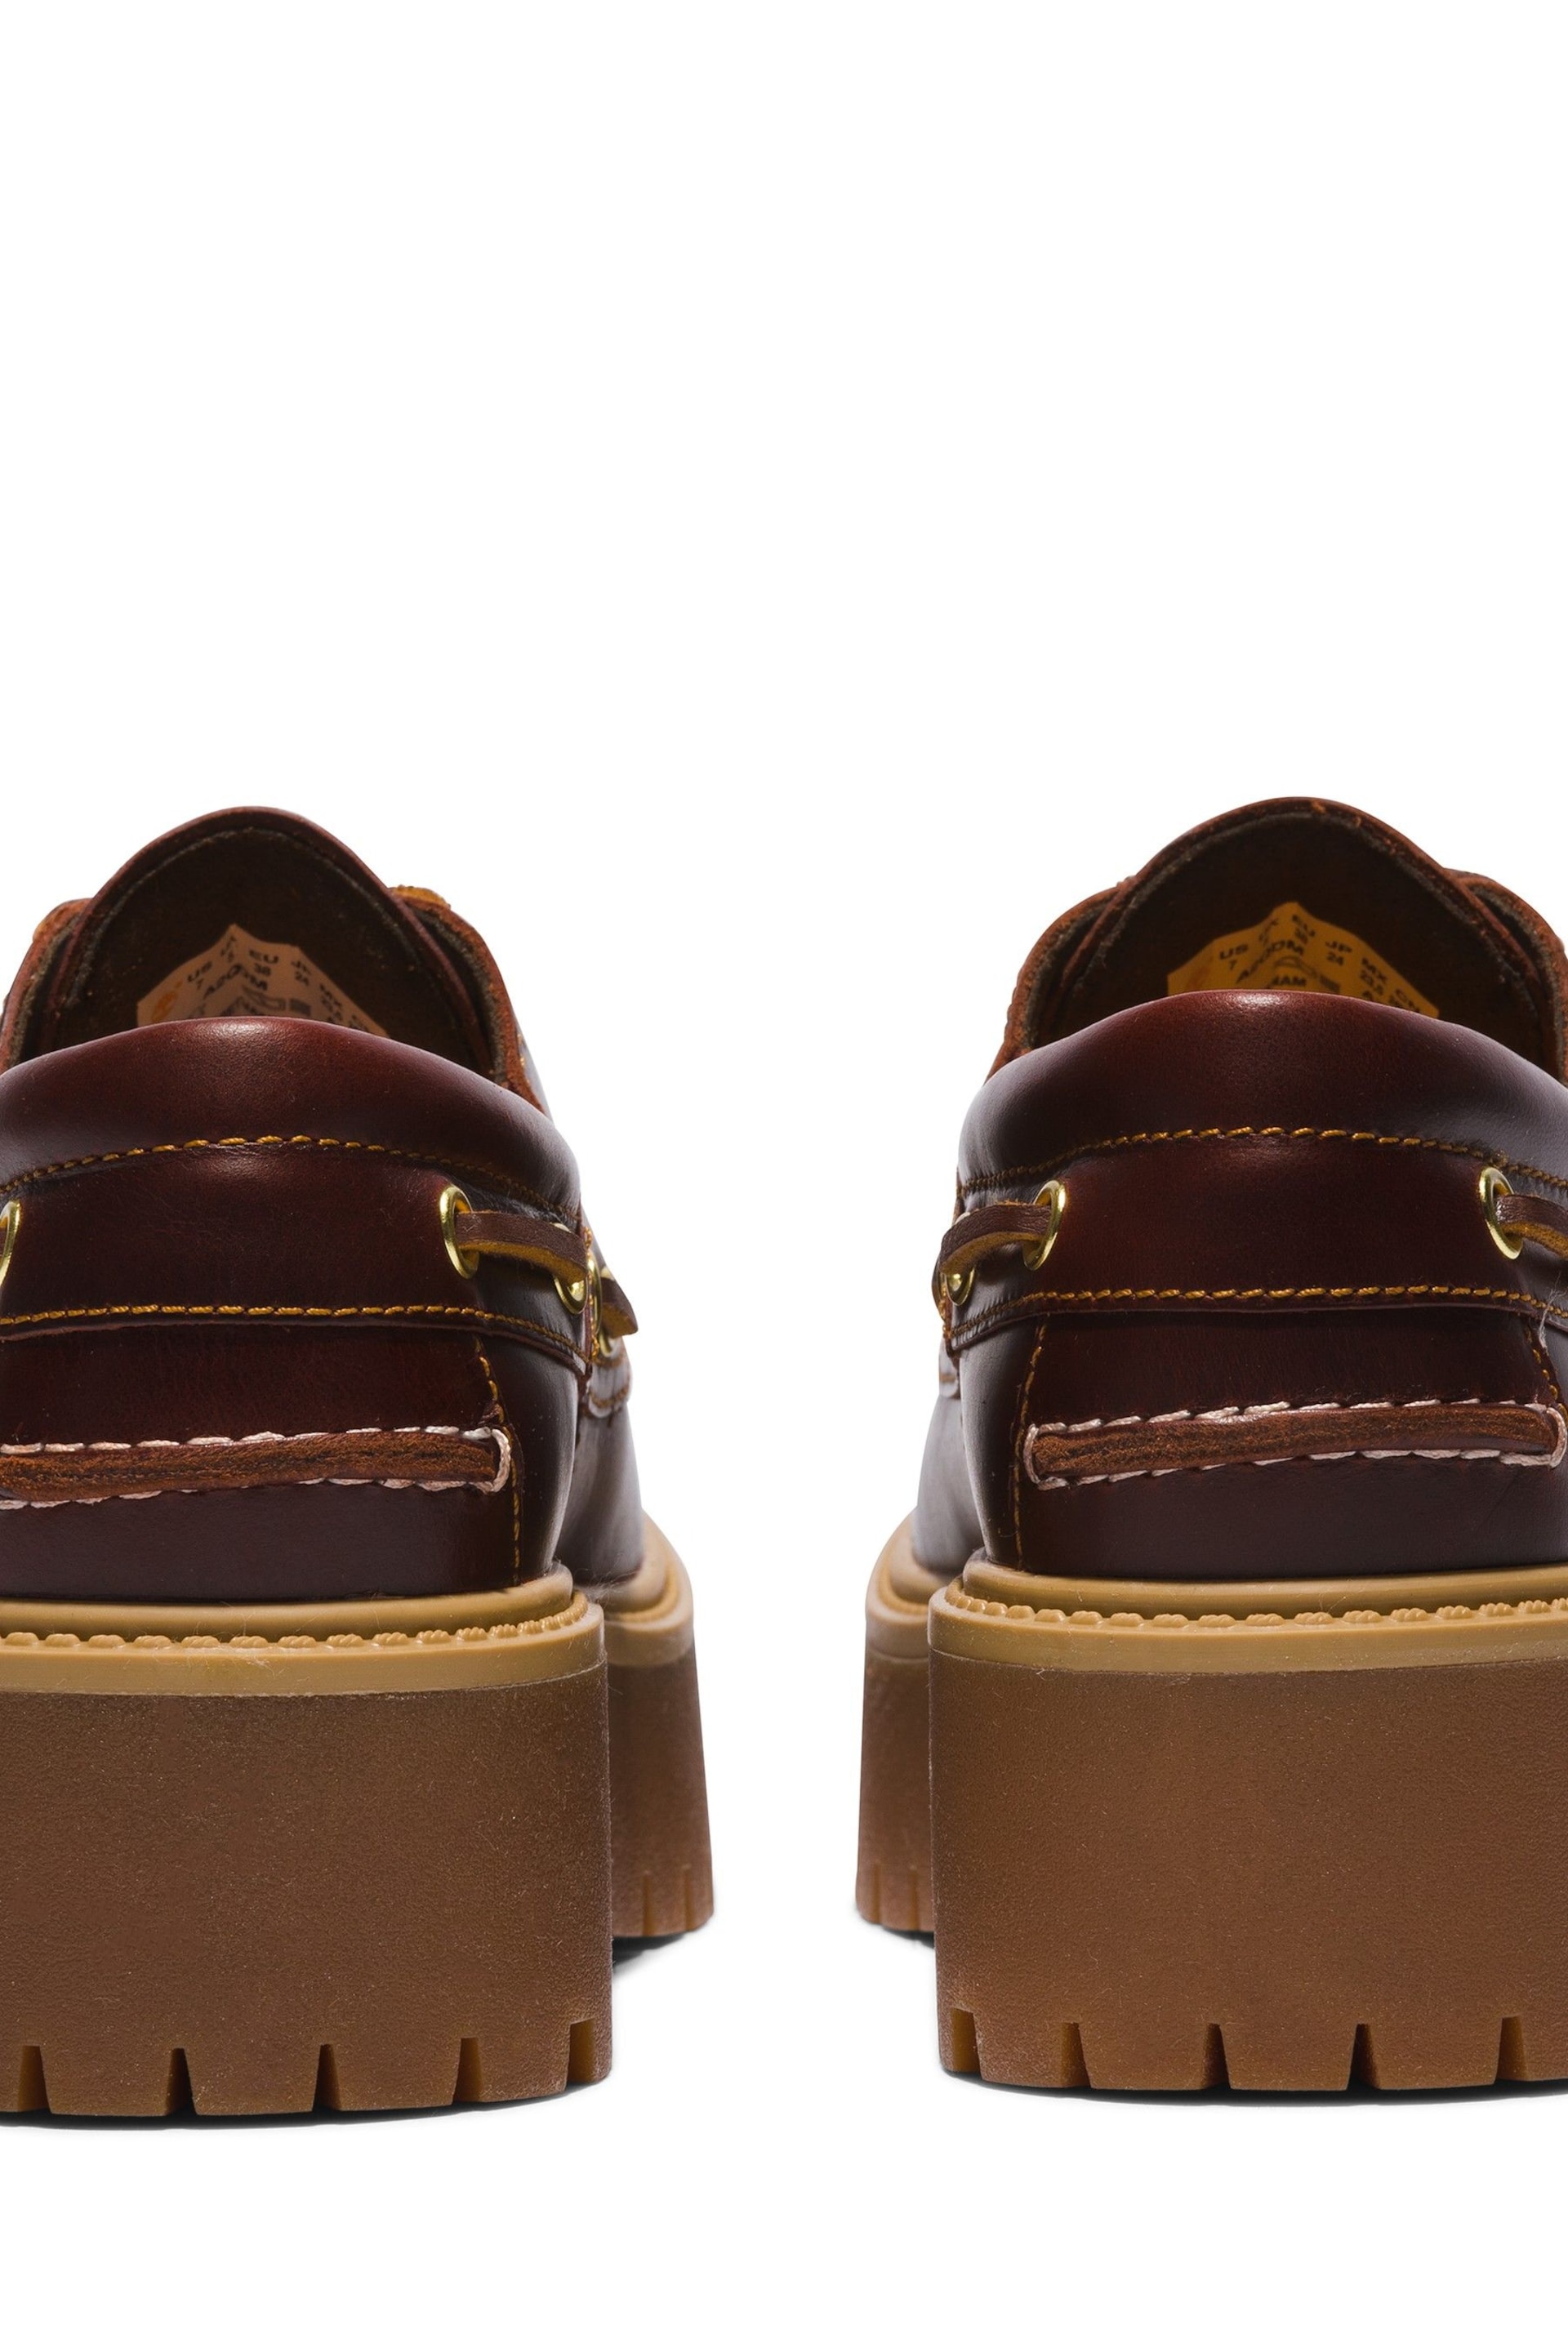 Timberland Street Boat Brown Shoes - Image 7 of 7